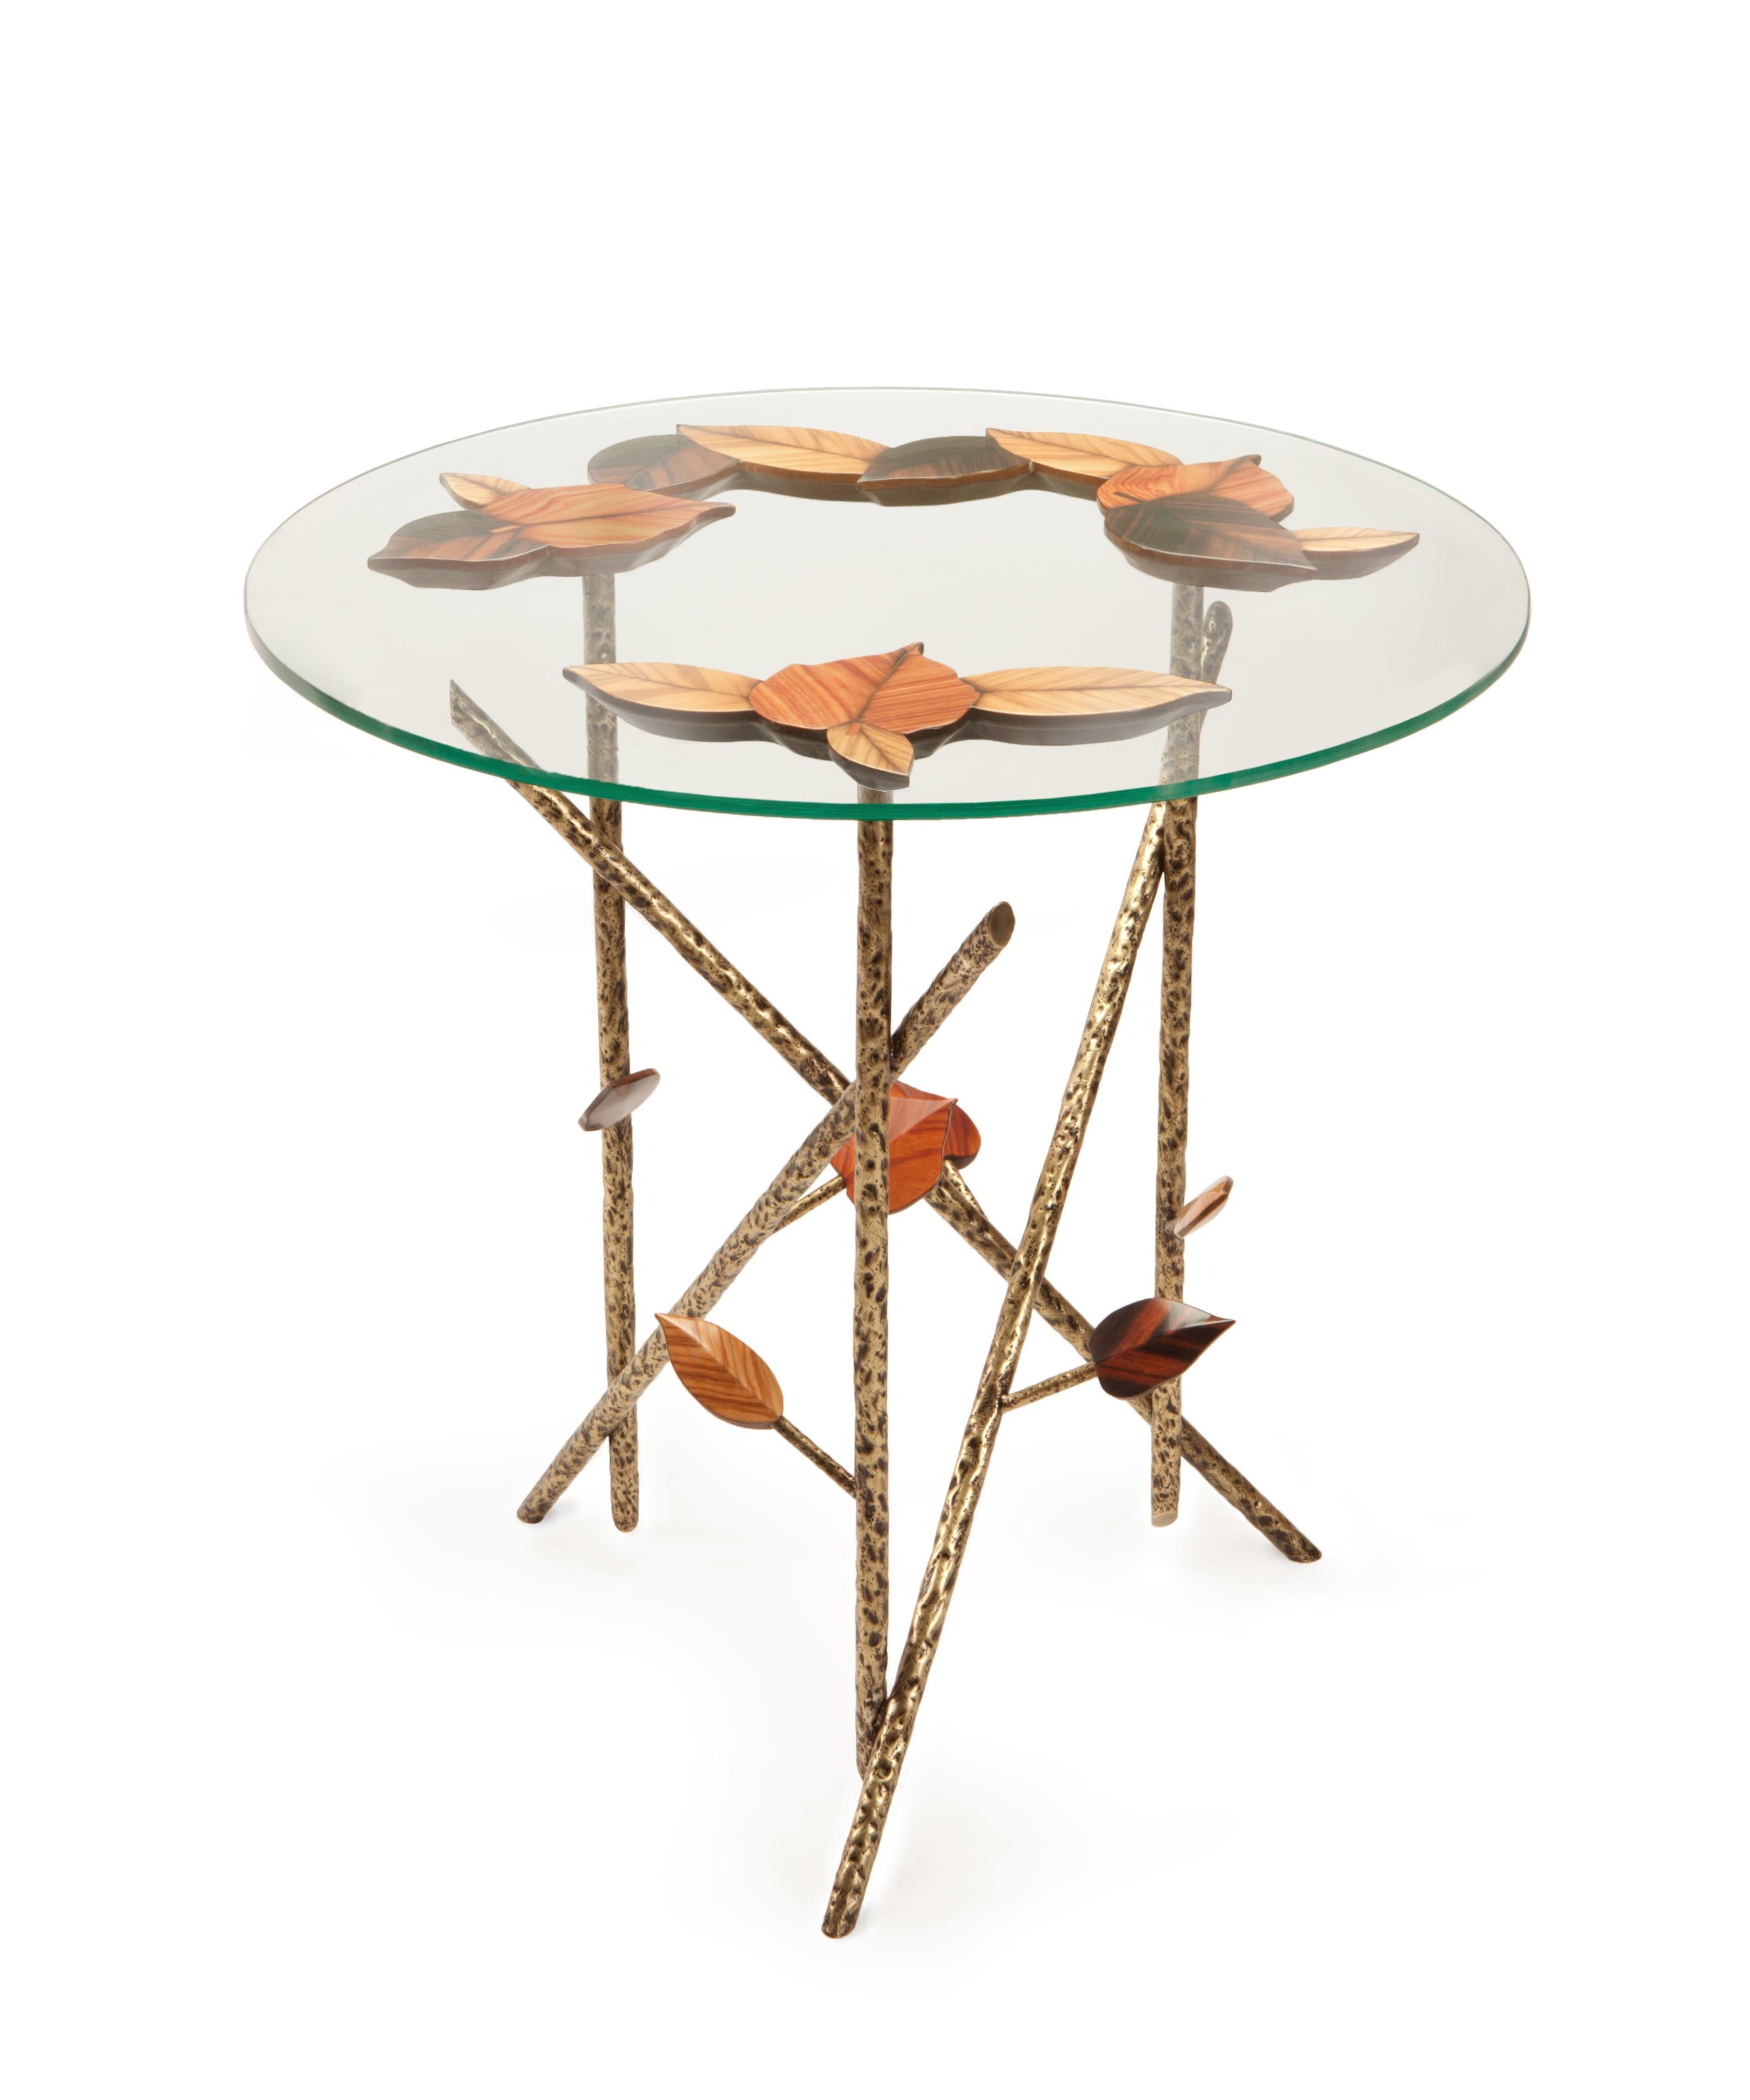 Inspired by the trees that in Autumn hold their foliage with difficulty, Tree Branches transmits the nakedness of the season.

Entirely handcrafted using traditional techniques like marquetry and hammered metal, Tree Branches is an extremely